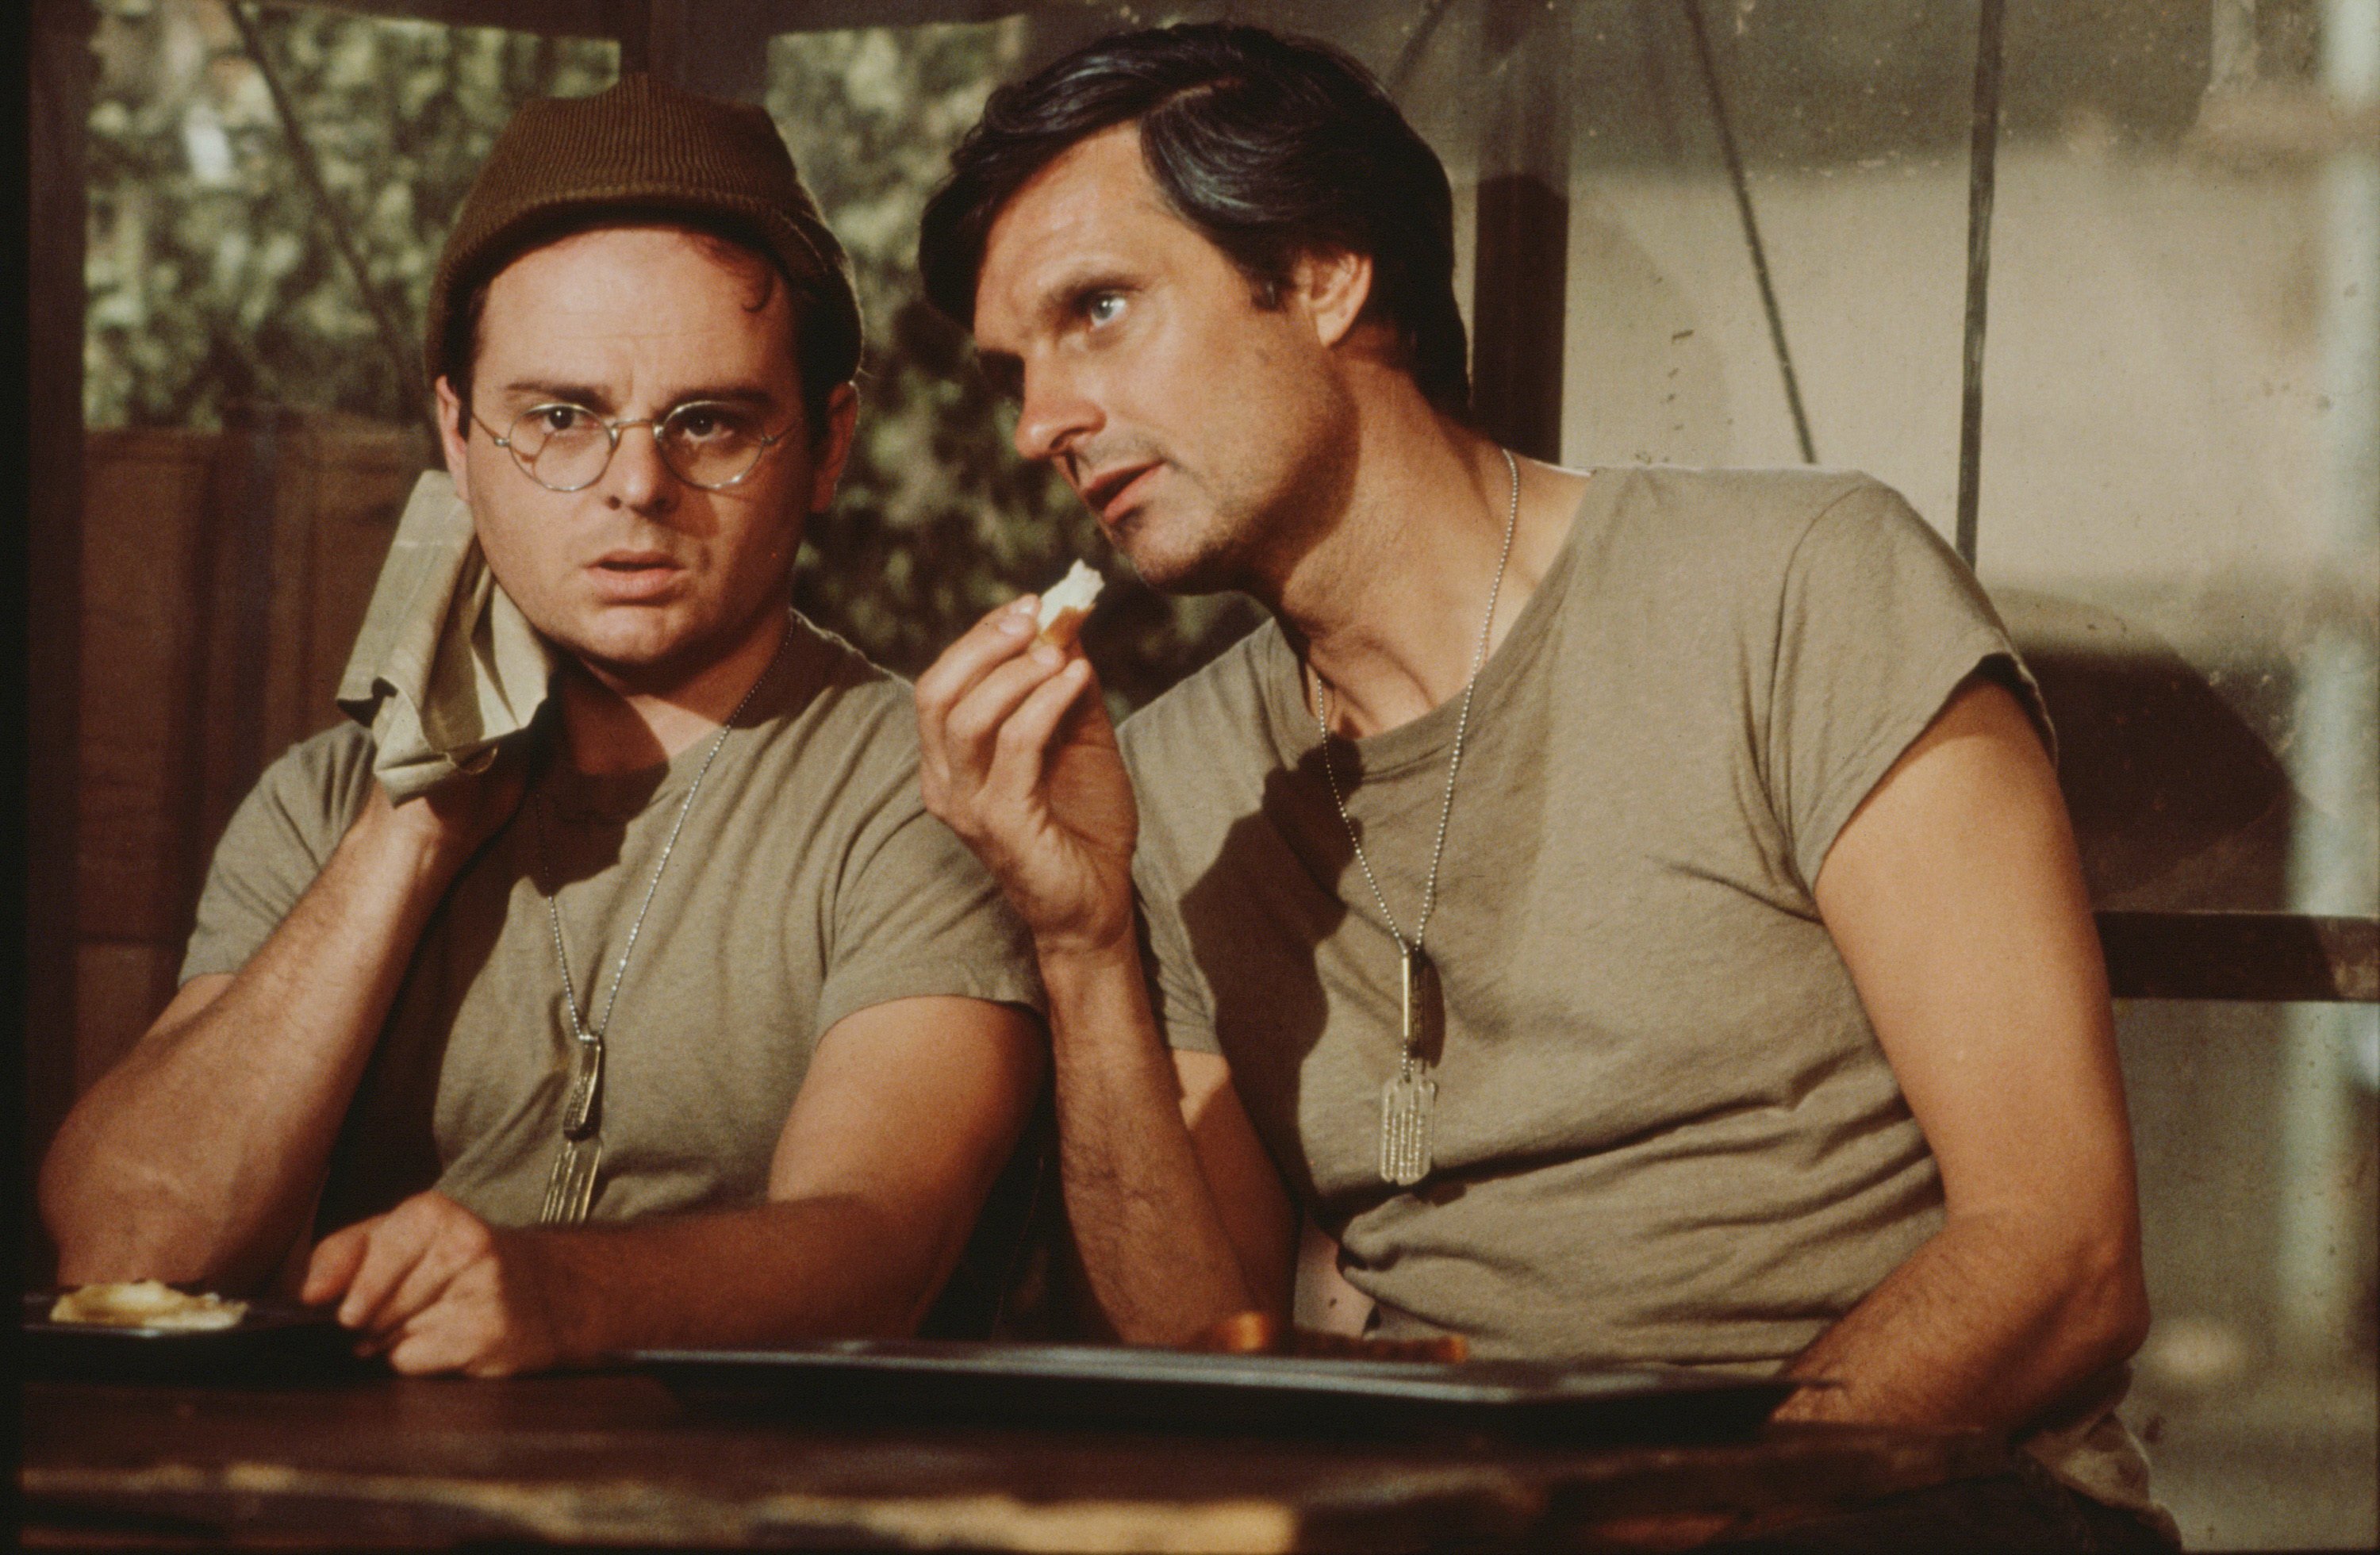 Gary Burghoff and Alan Alda in an episode of "M*A*S*H," California, 1976 | Source: Getty Images